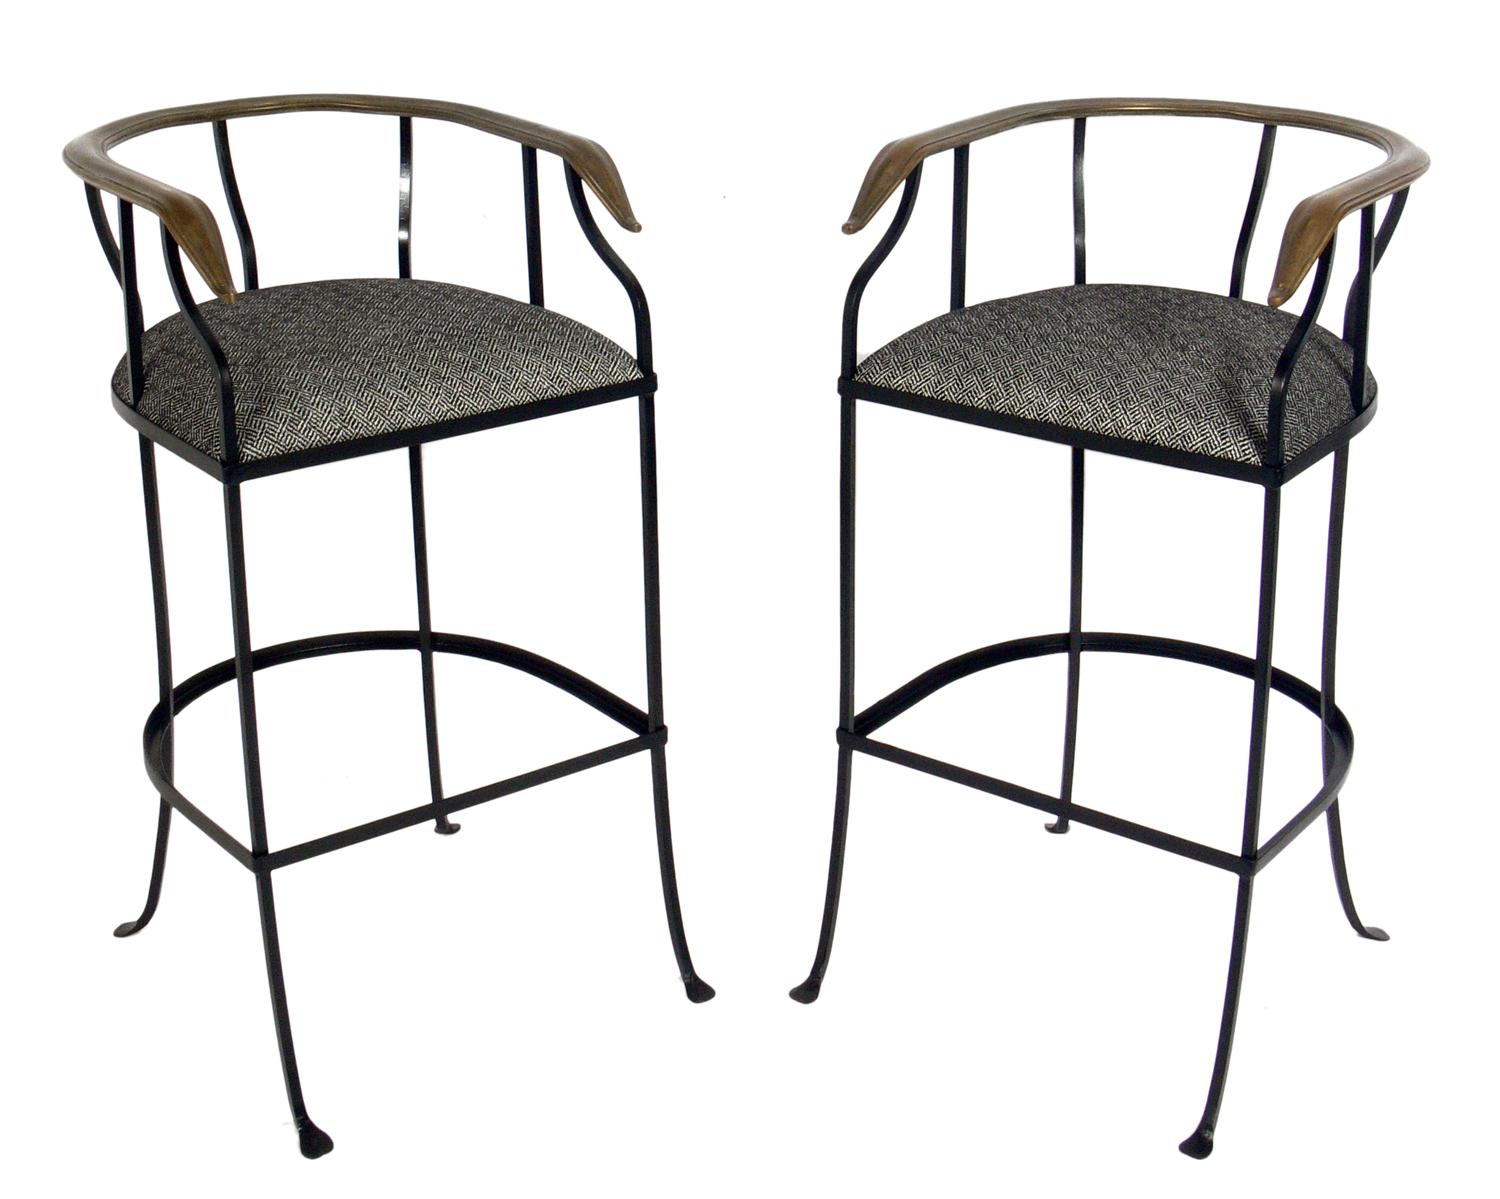 Pair of elegant brass and iron bar stools, American, circa 1950s. They have been beautifully restored with the iron frames painted and new black and white herringbone upholstery installed. The brass horseshoe backrests retain their warm original